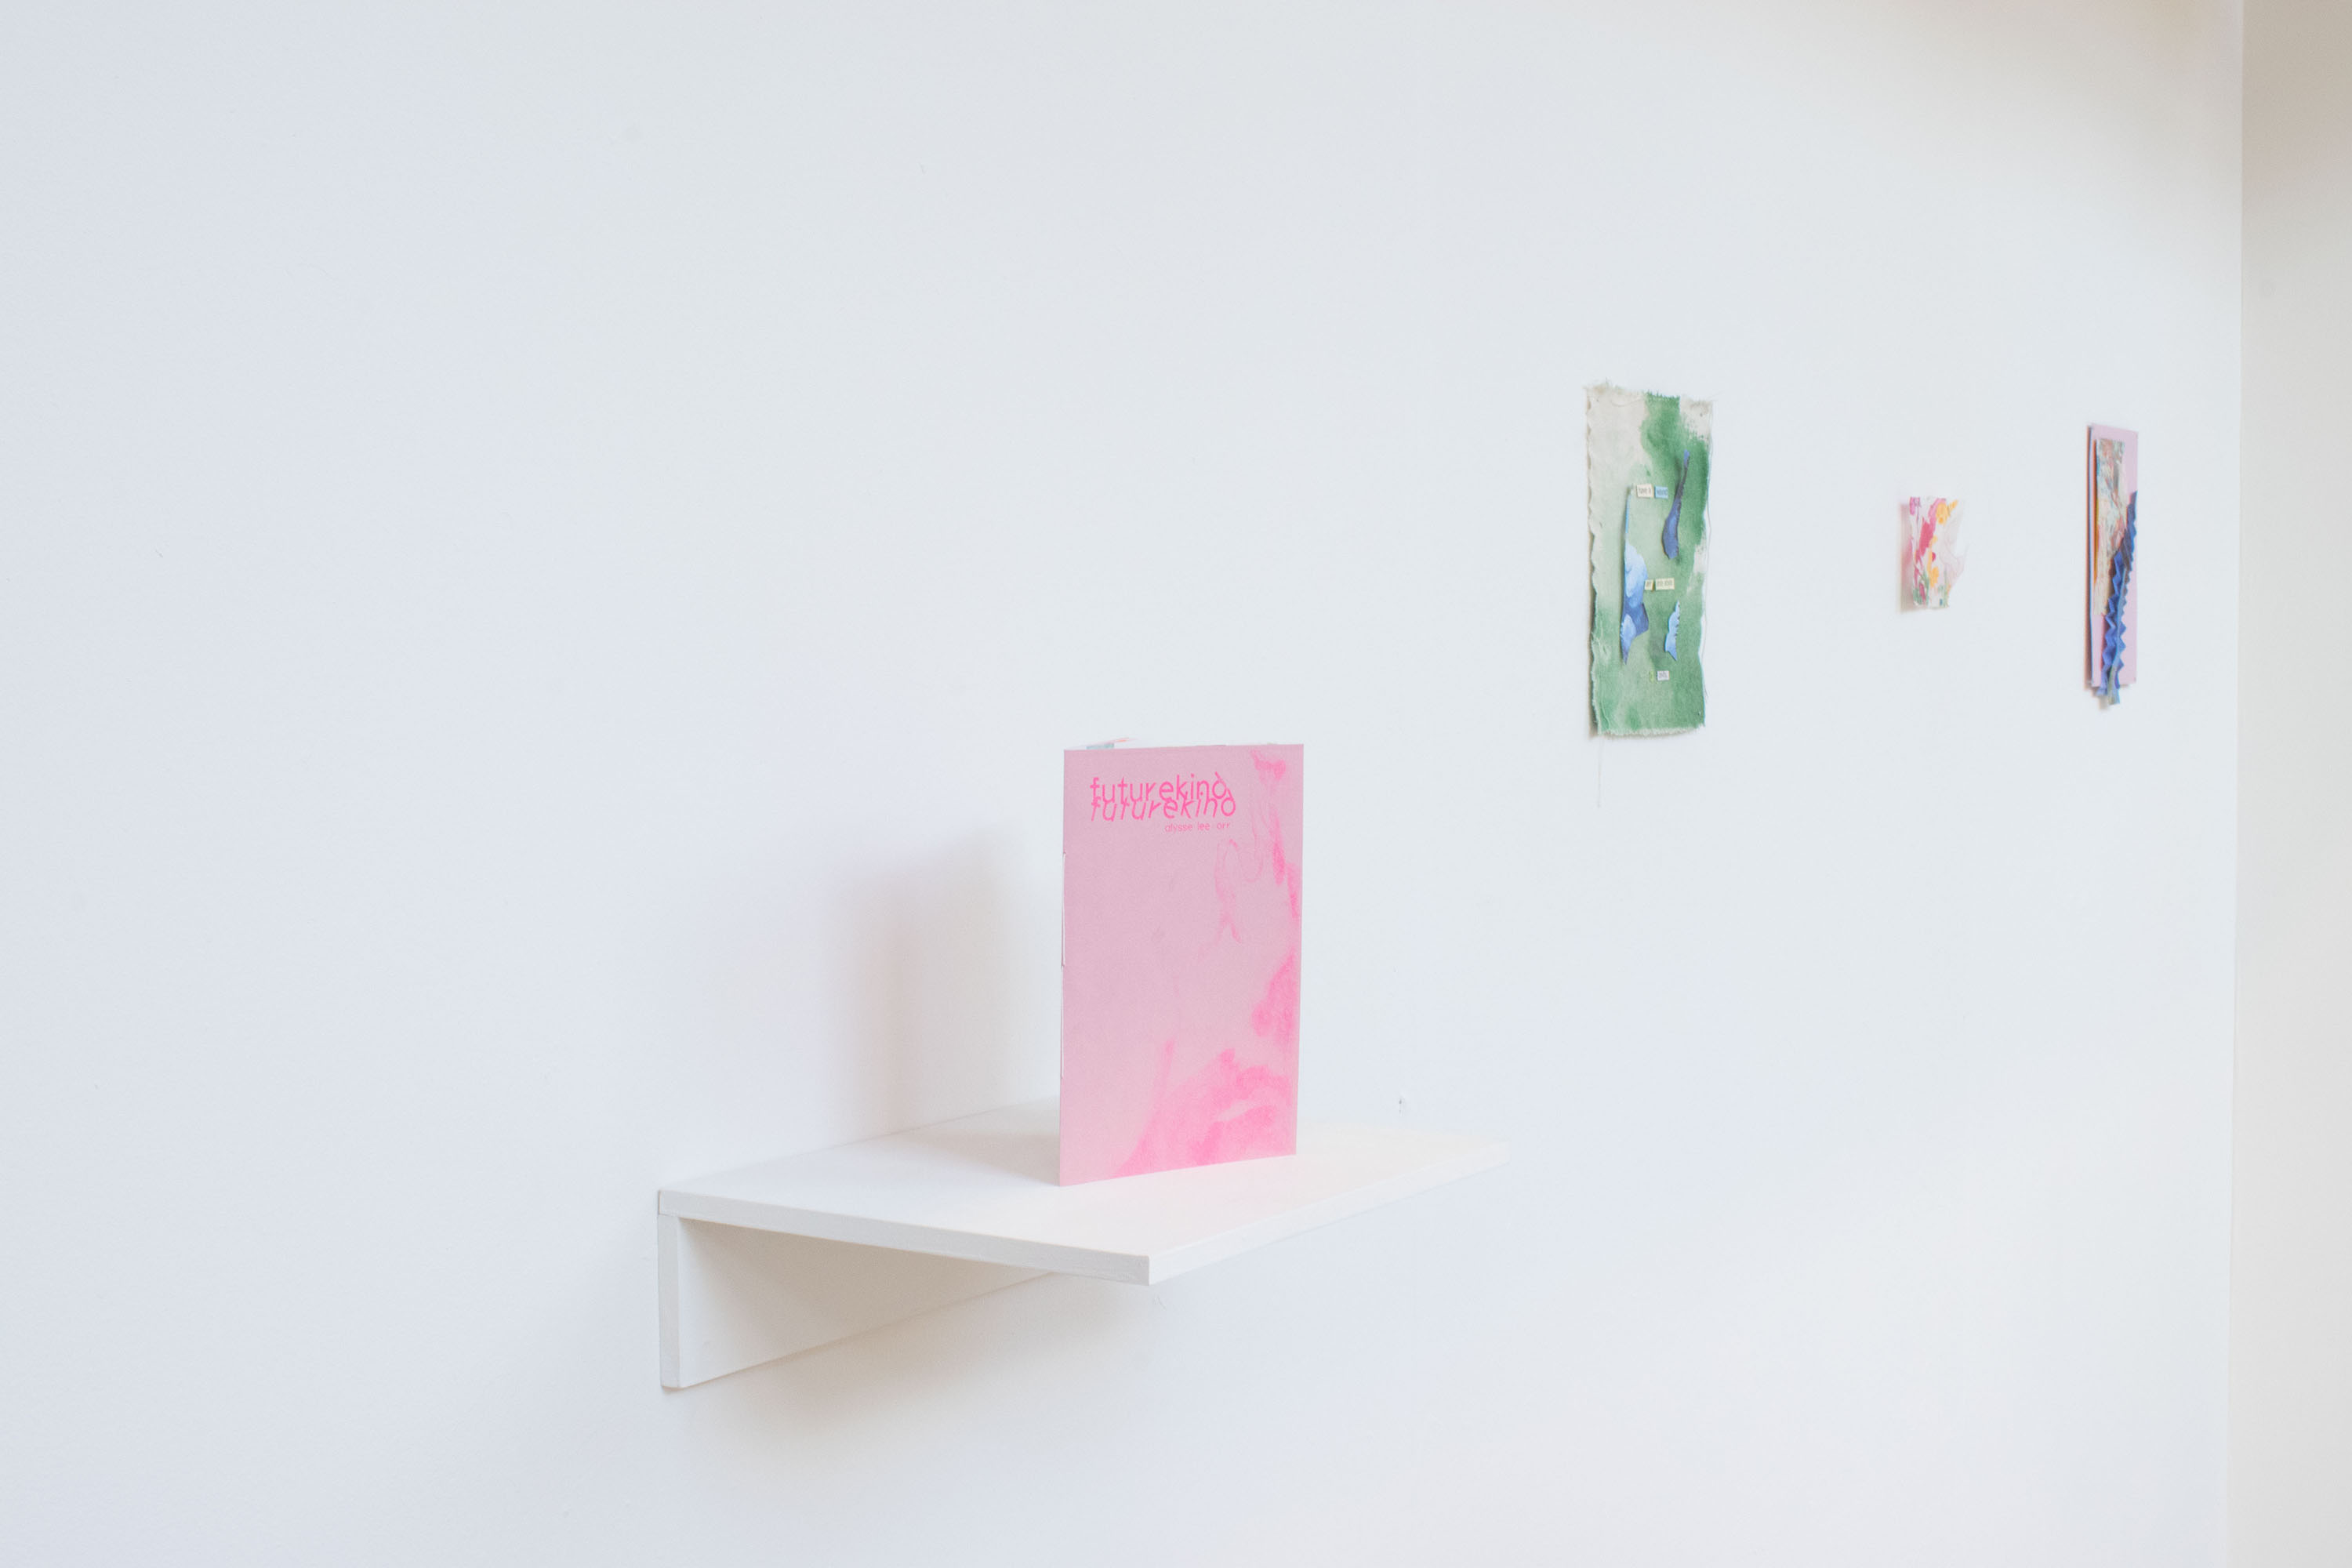 Installation image showing small book on a shelf and three small collages on the wall. 